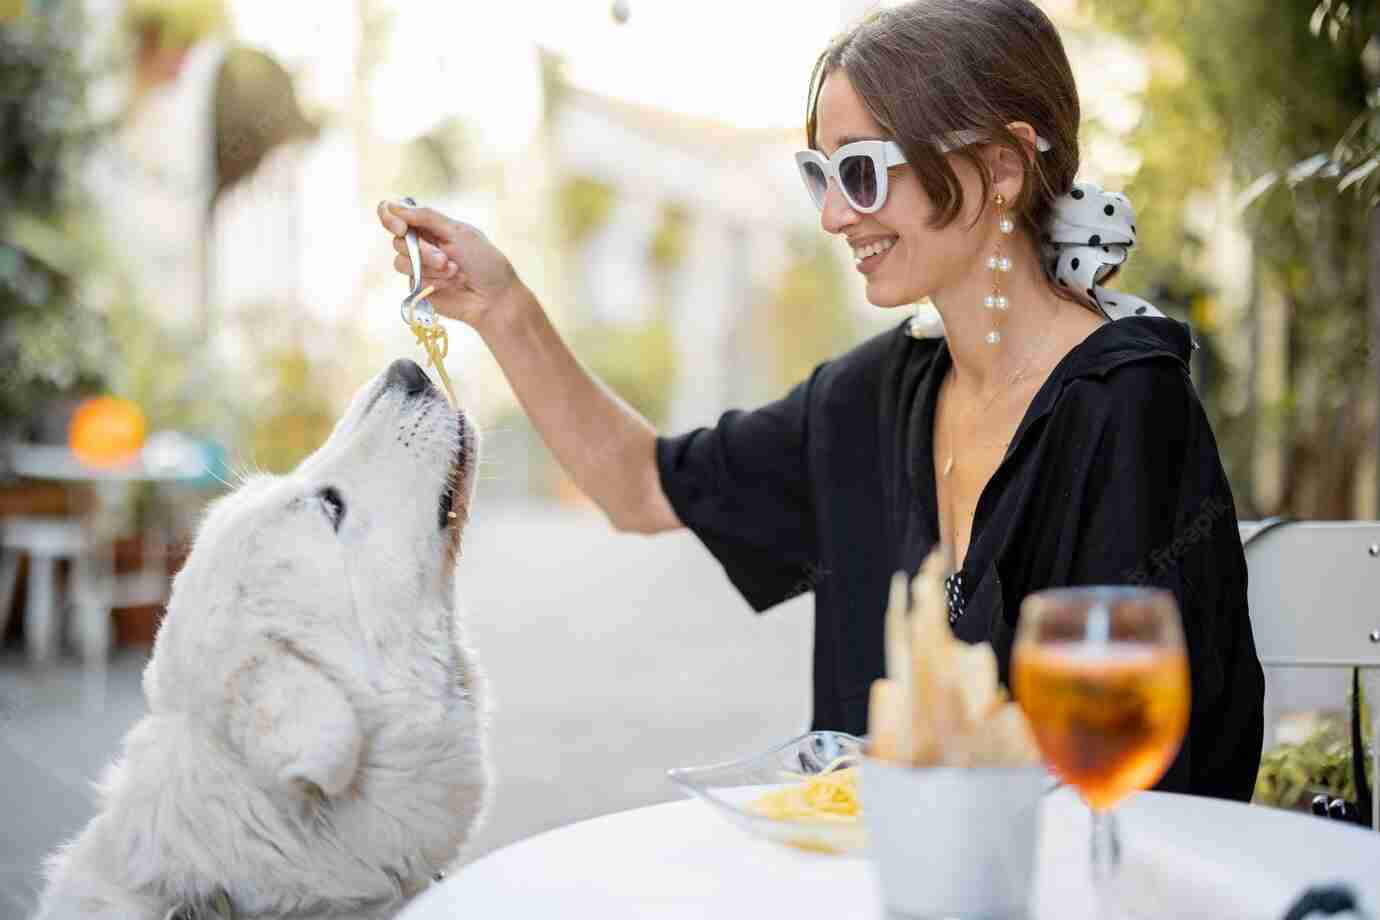 woman-eating-pasta-with-her-cute-white-dog-restaurant_506452-15606